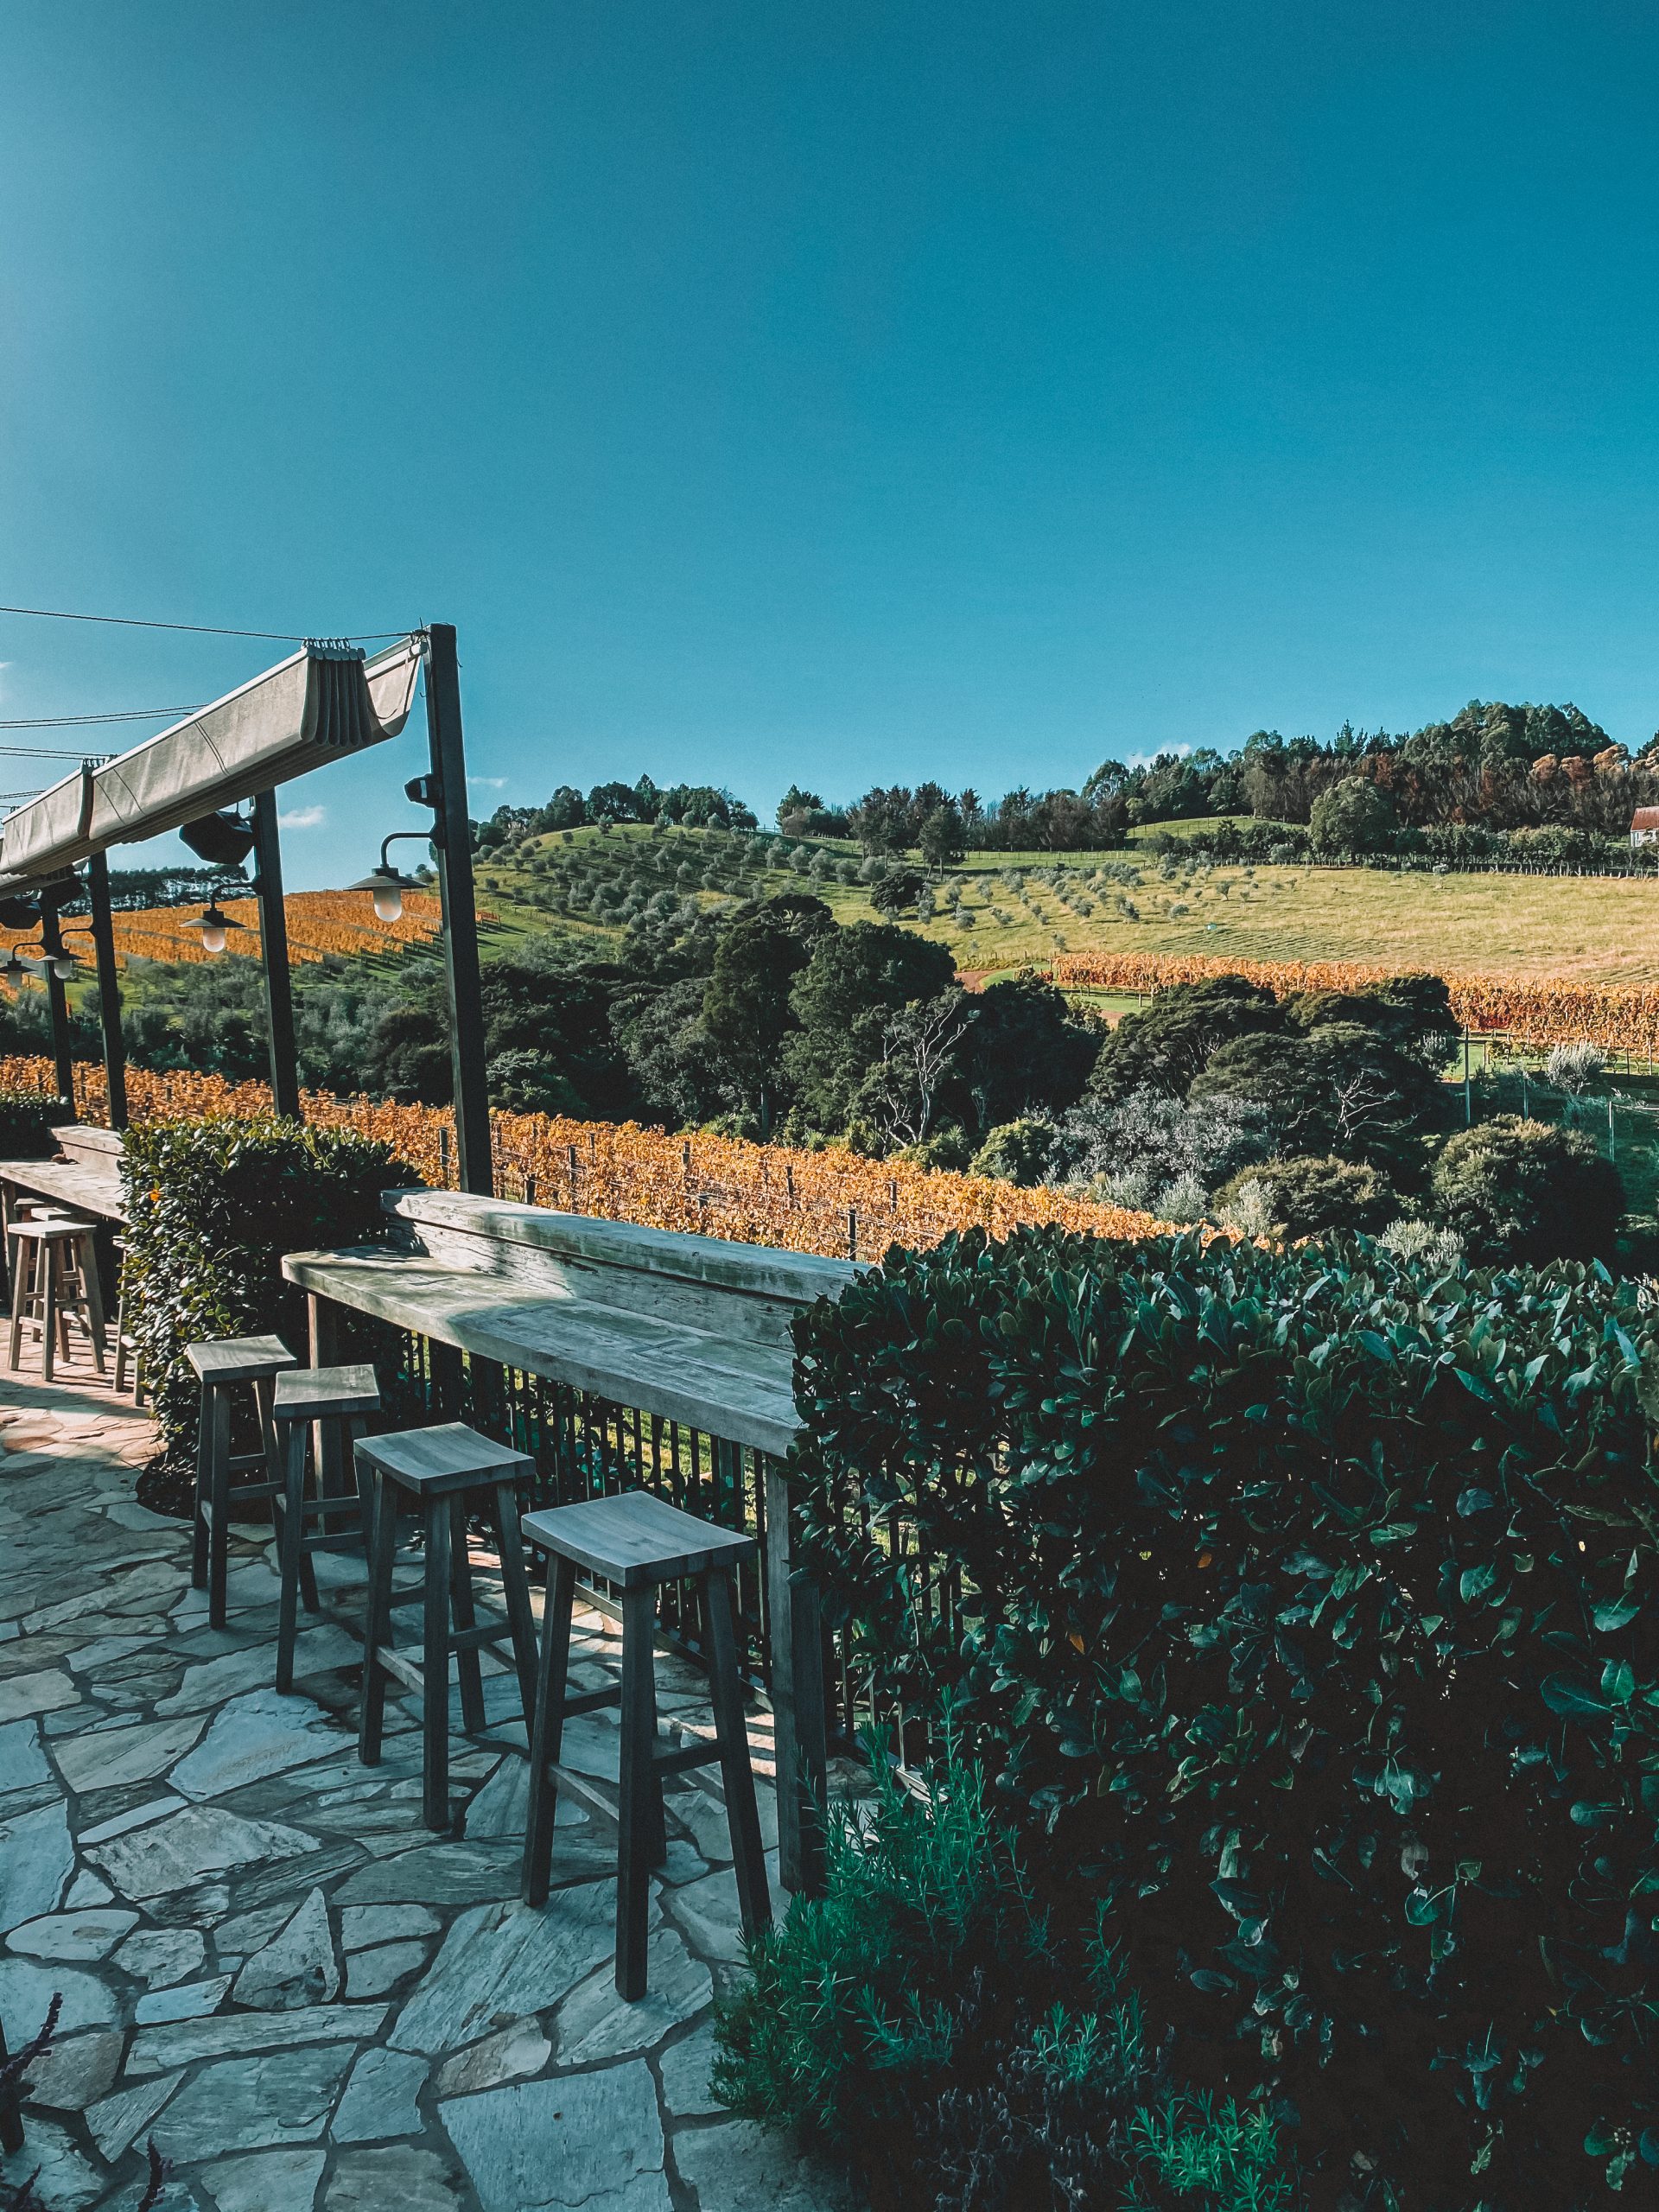 An outdoor stone patio with wooden stools and a high table overlooking a green vineyard surrounded by trees and bushes.